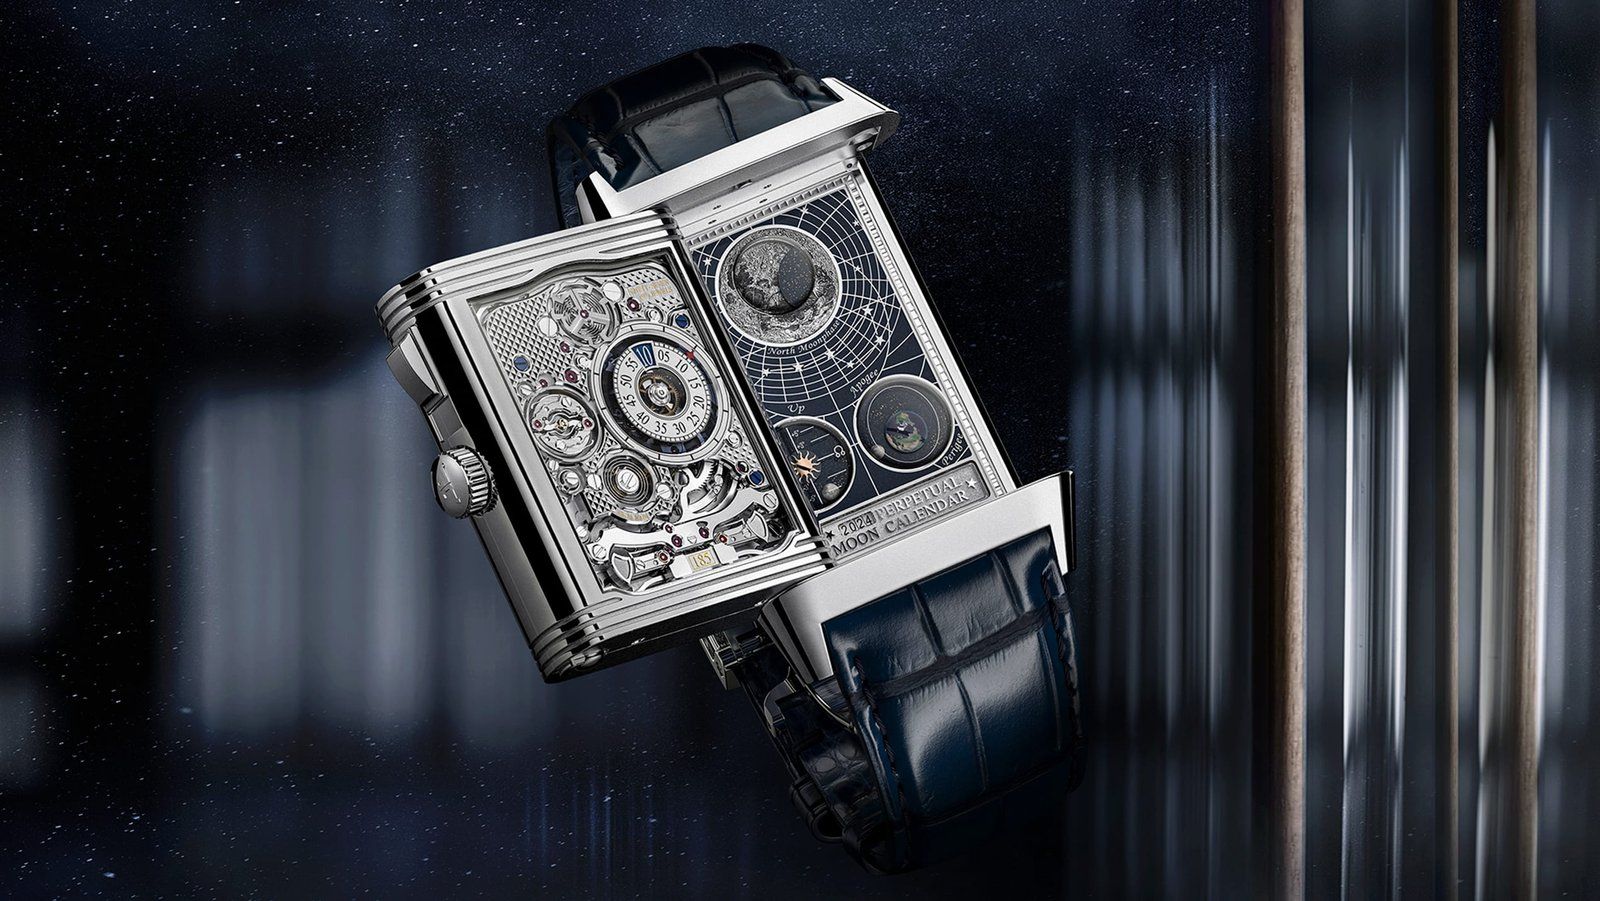 Interview with CEO of Jaeger-LeCoultre discusses Watches & Wonders 2022 success - Hybris Mechanica Calibre 185 Quadriptyque featuring 11 complications